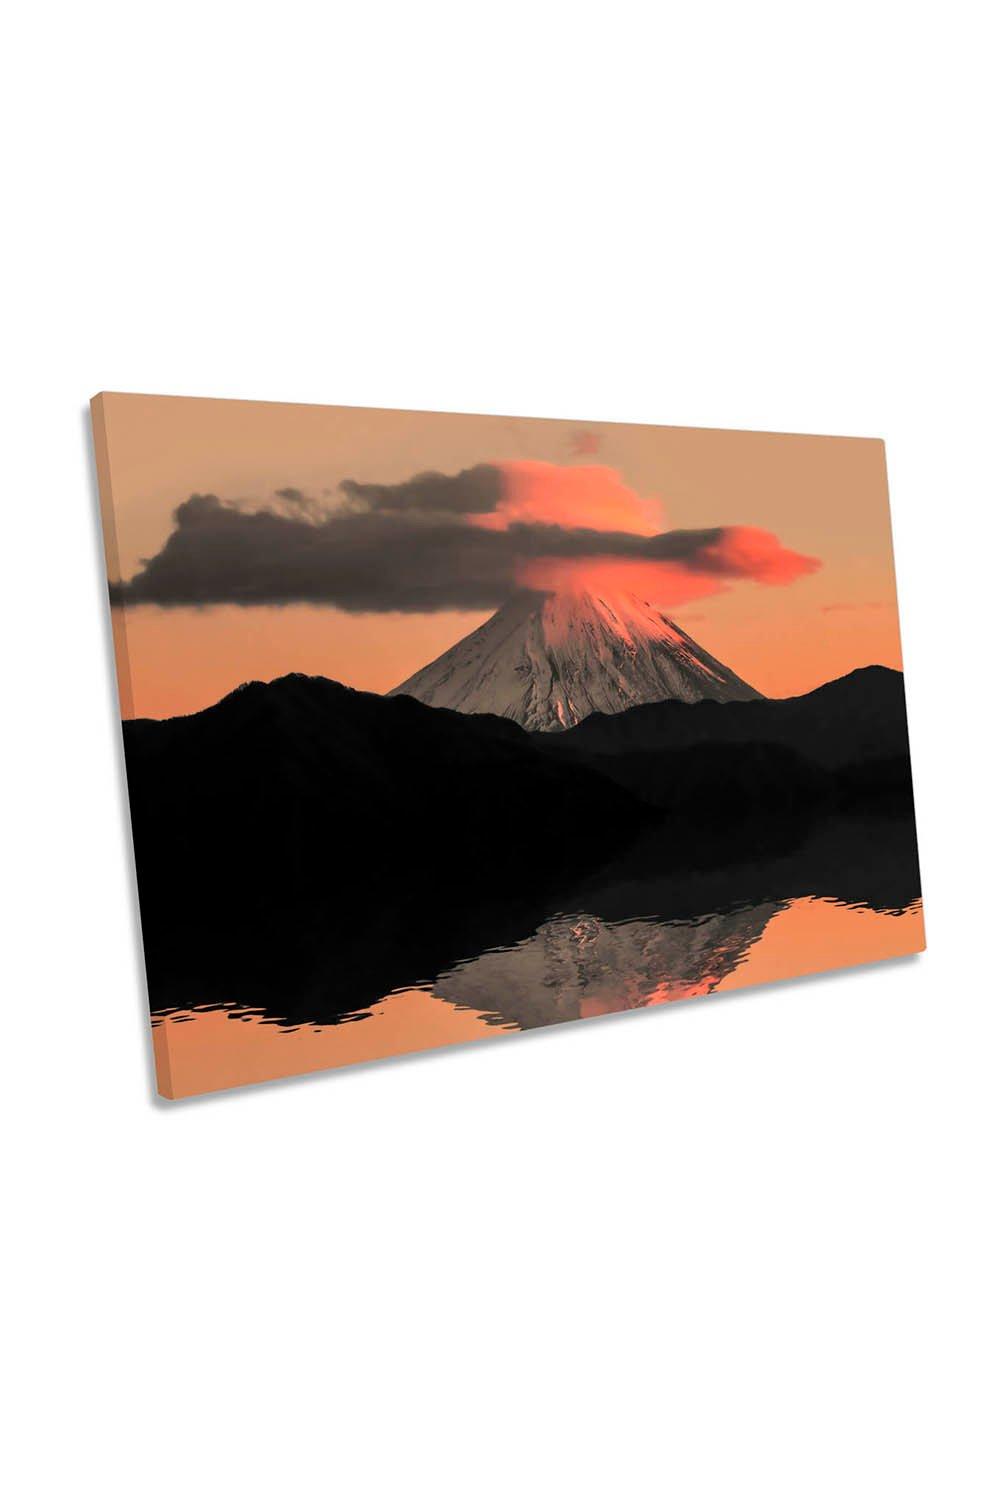 Mount Fuji Japan Clouds Sunset Canvas Wall Art Picture Print